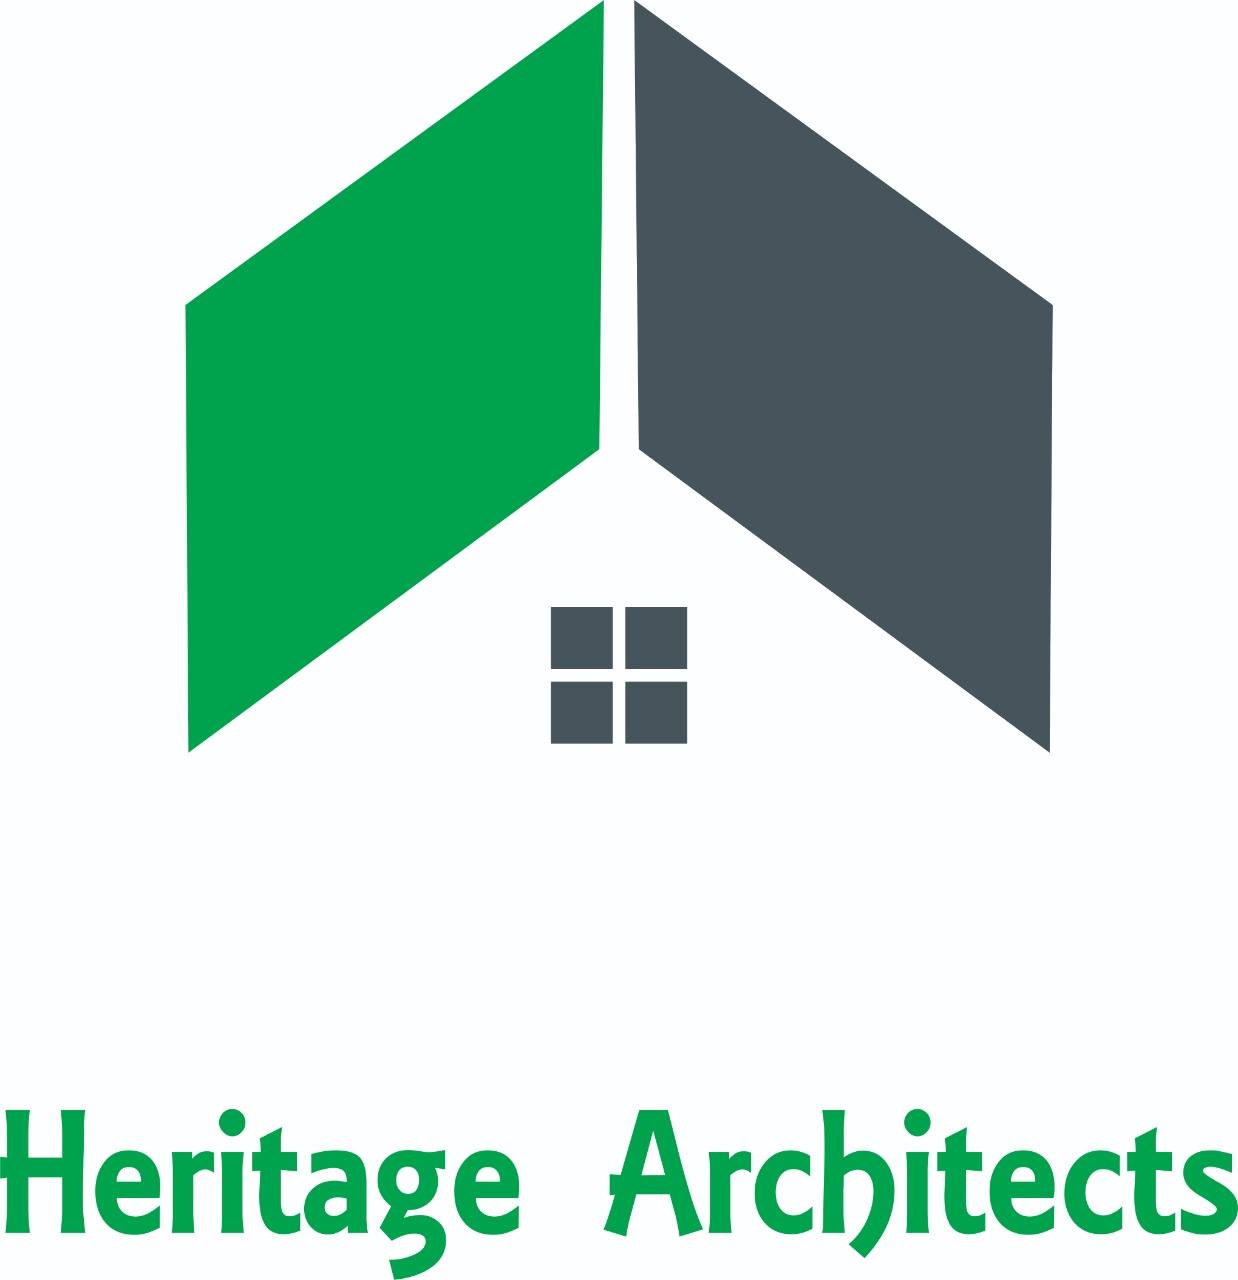 Heritage Architects|Legal Services|Professional Services